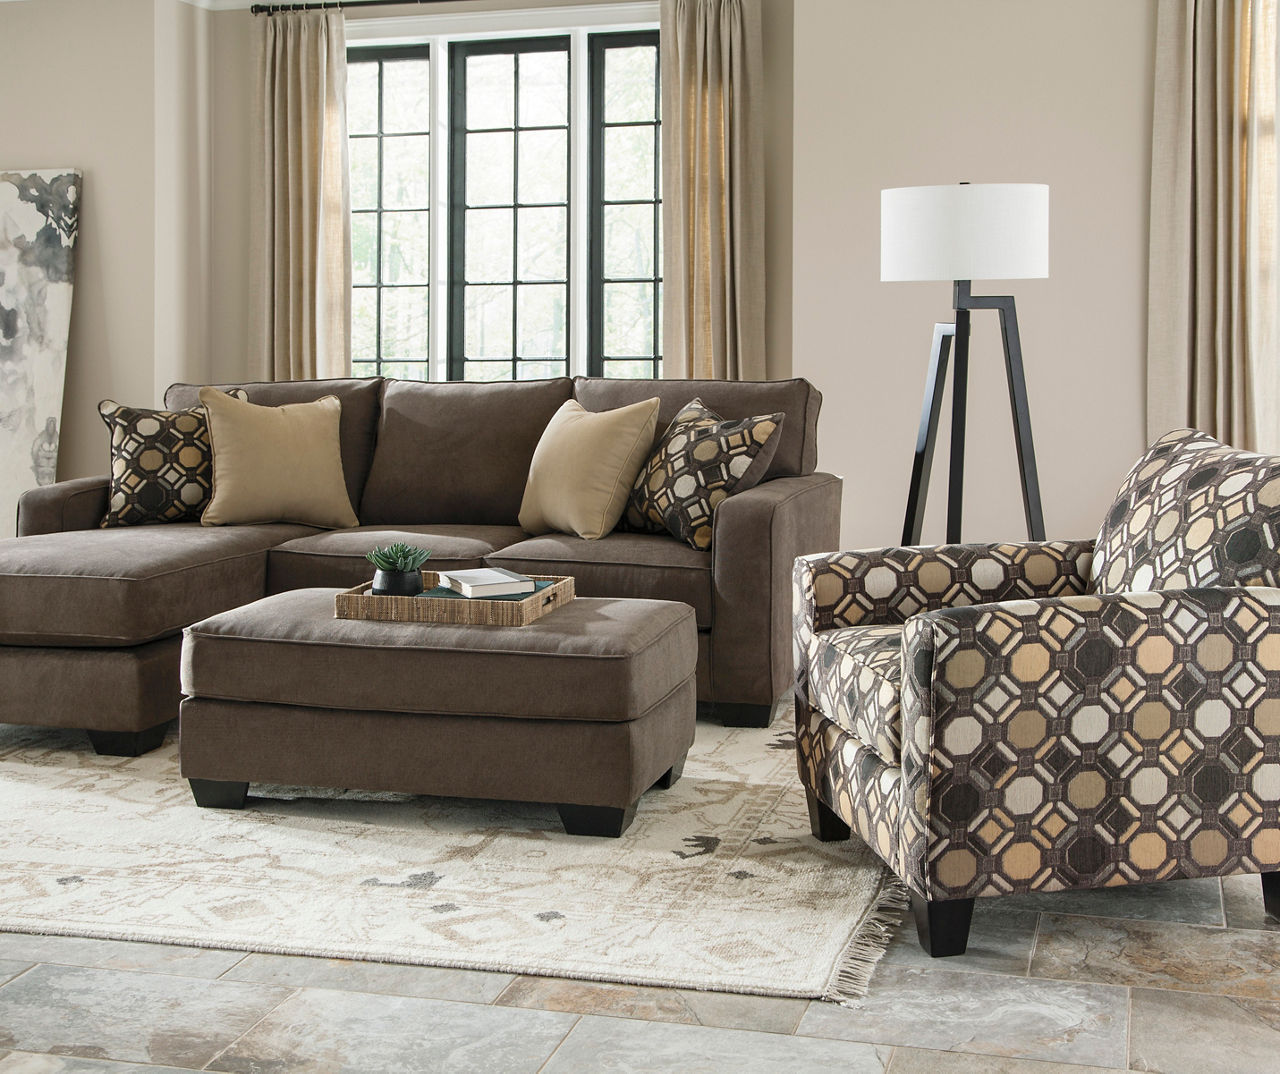 Keenum Living Room Furniture Collection